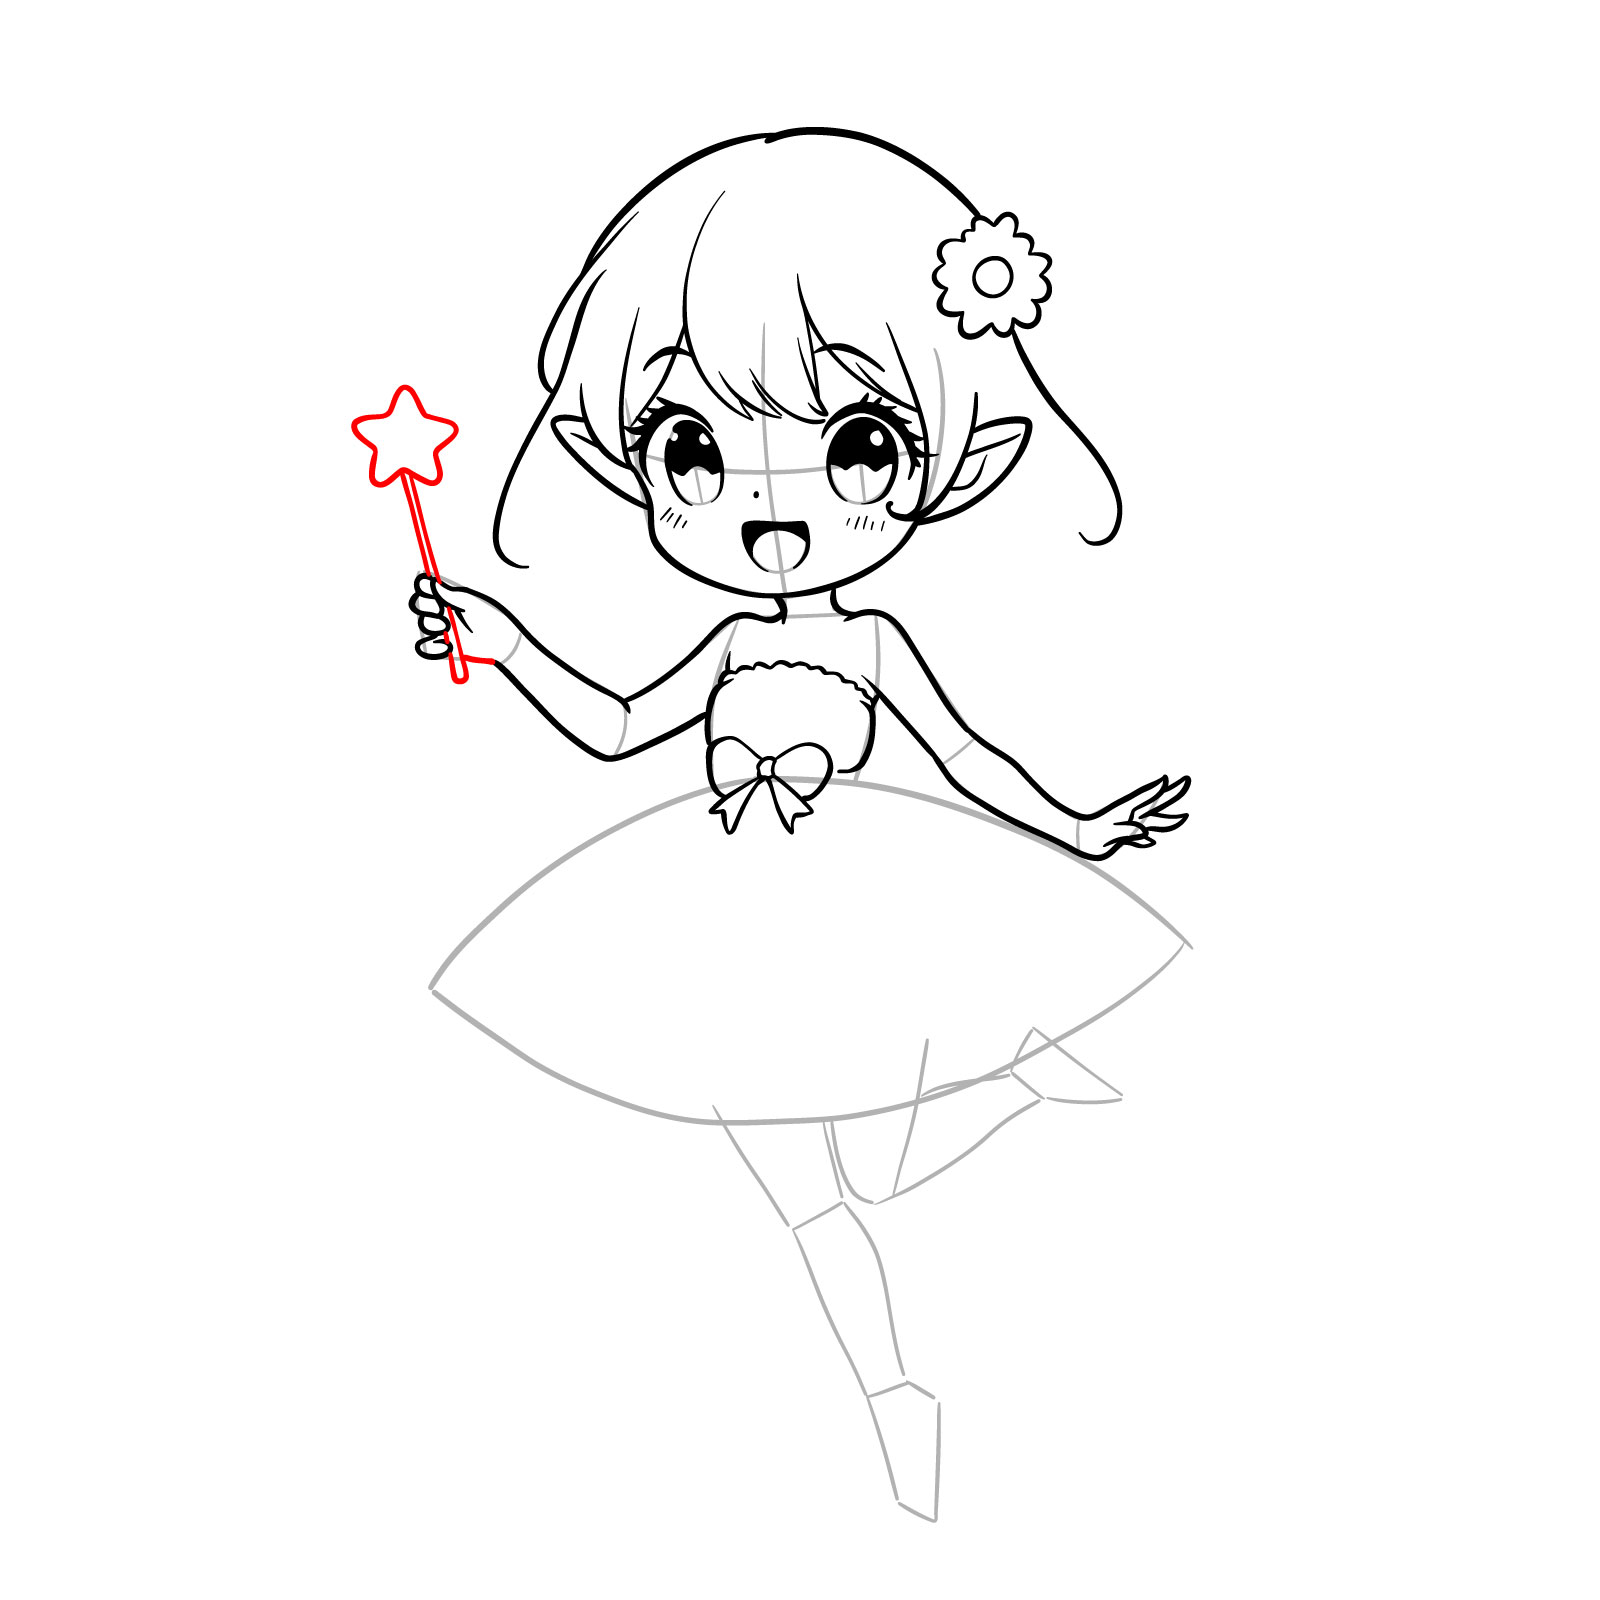 Sketch of a fairy holding a magic wand - step 13